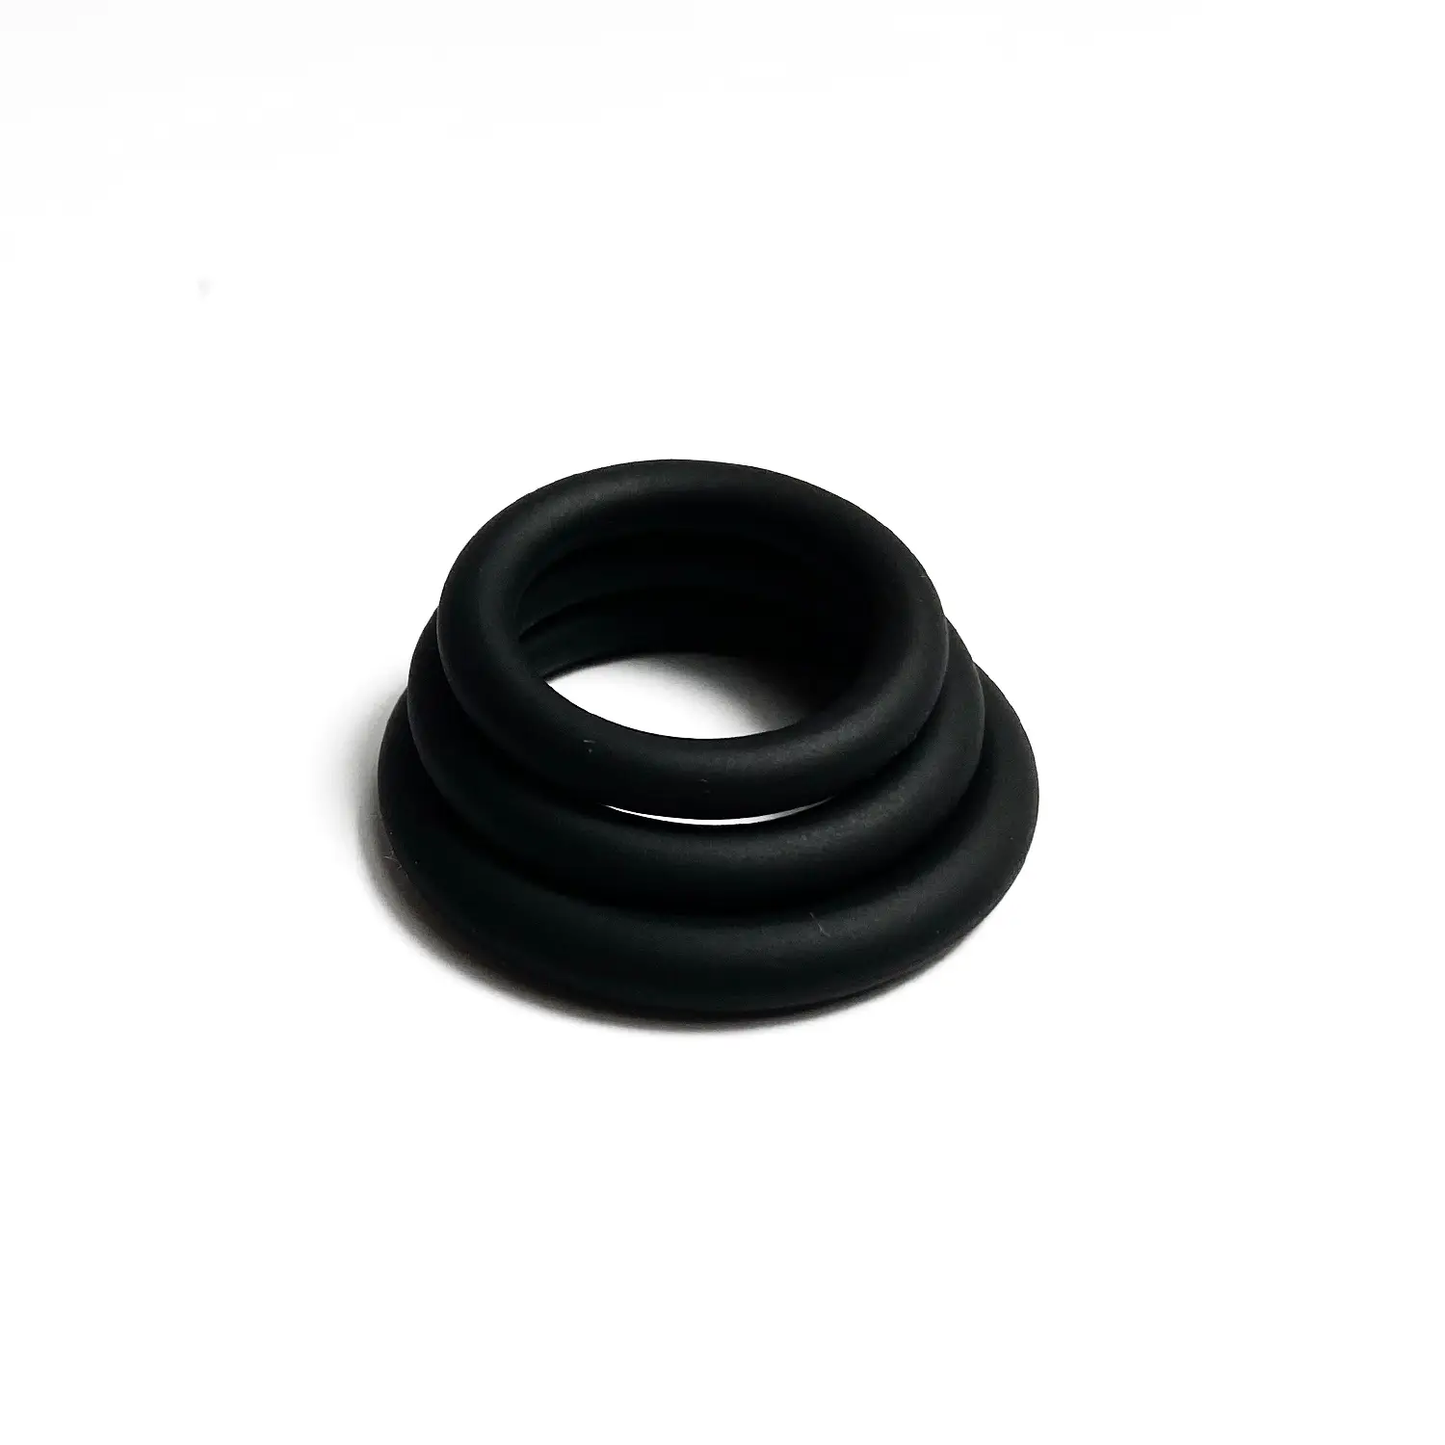 The Horny Company - John O Triple Silicone Cock Ring Set of 3